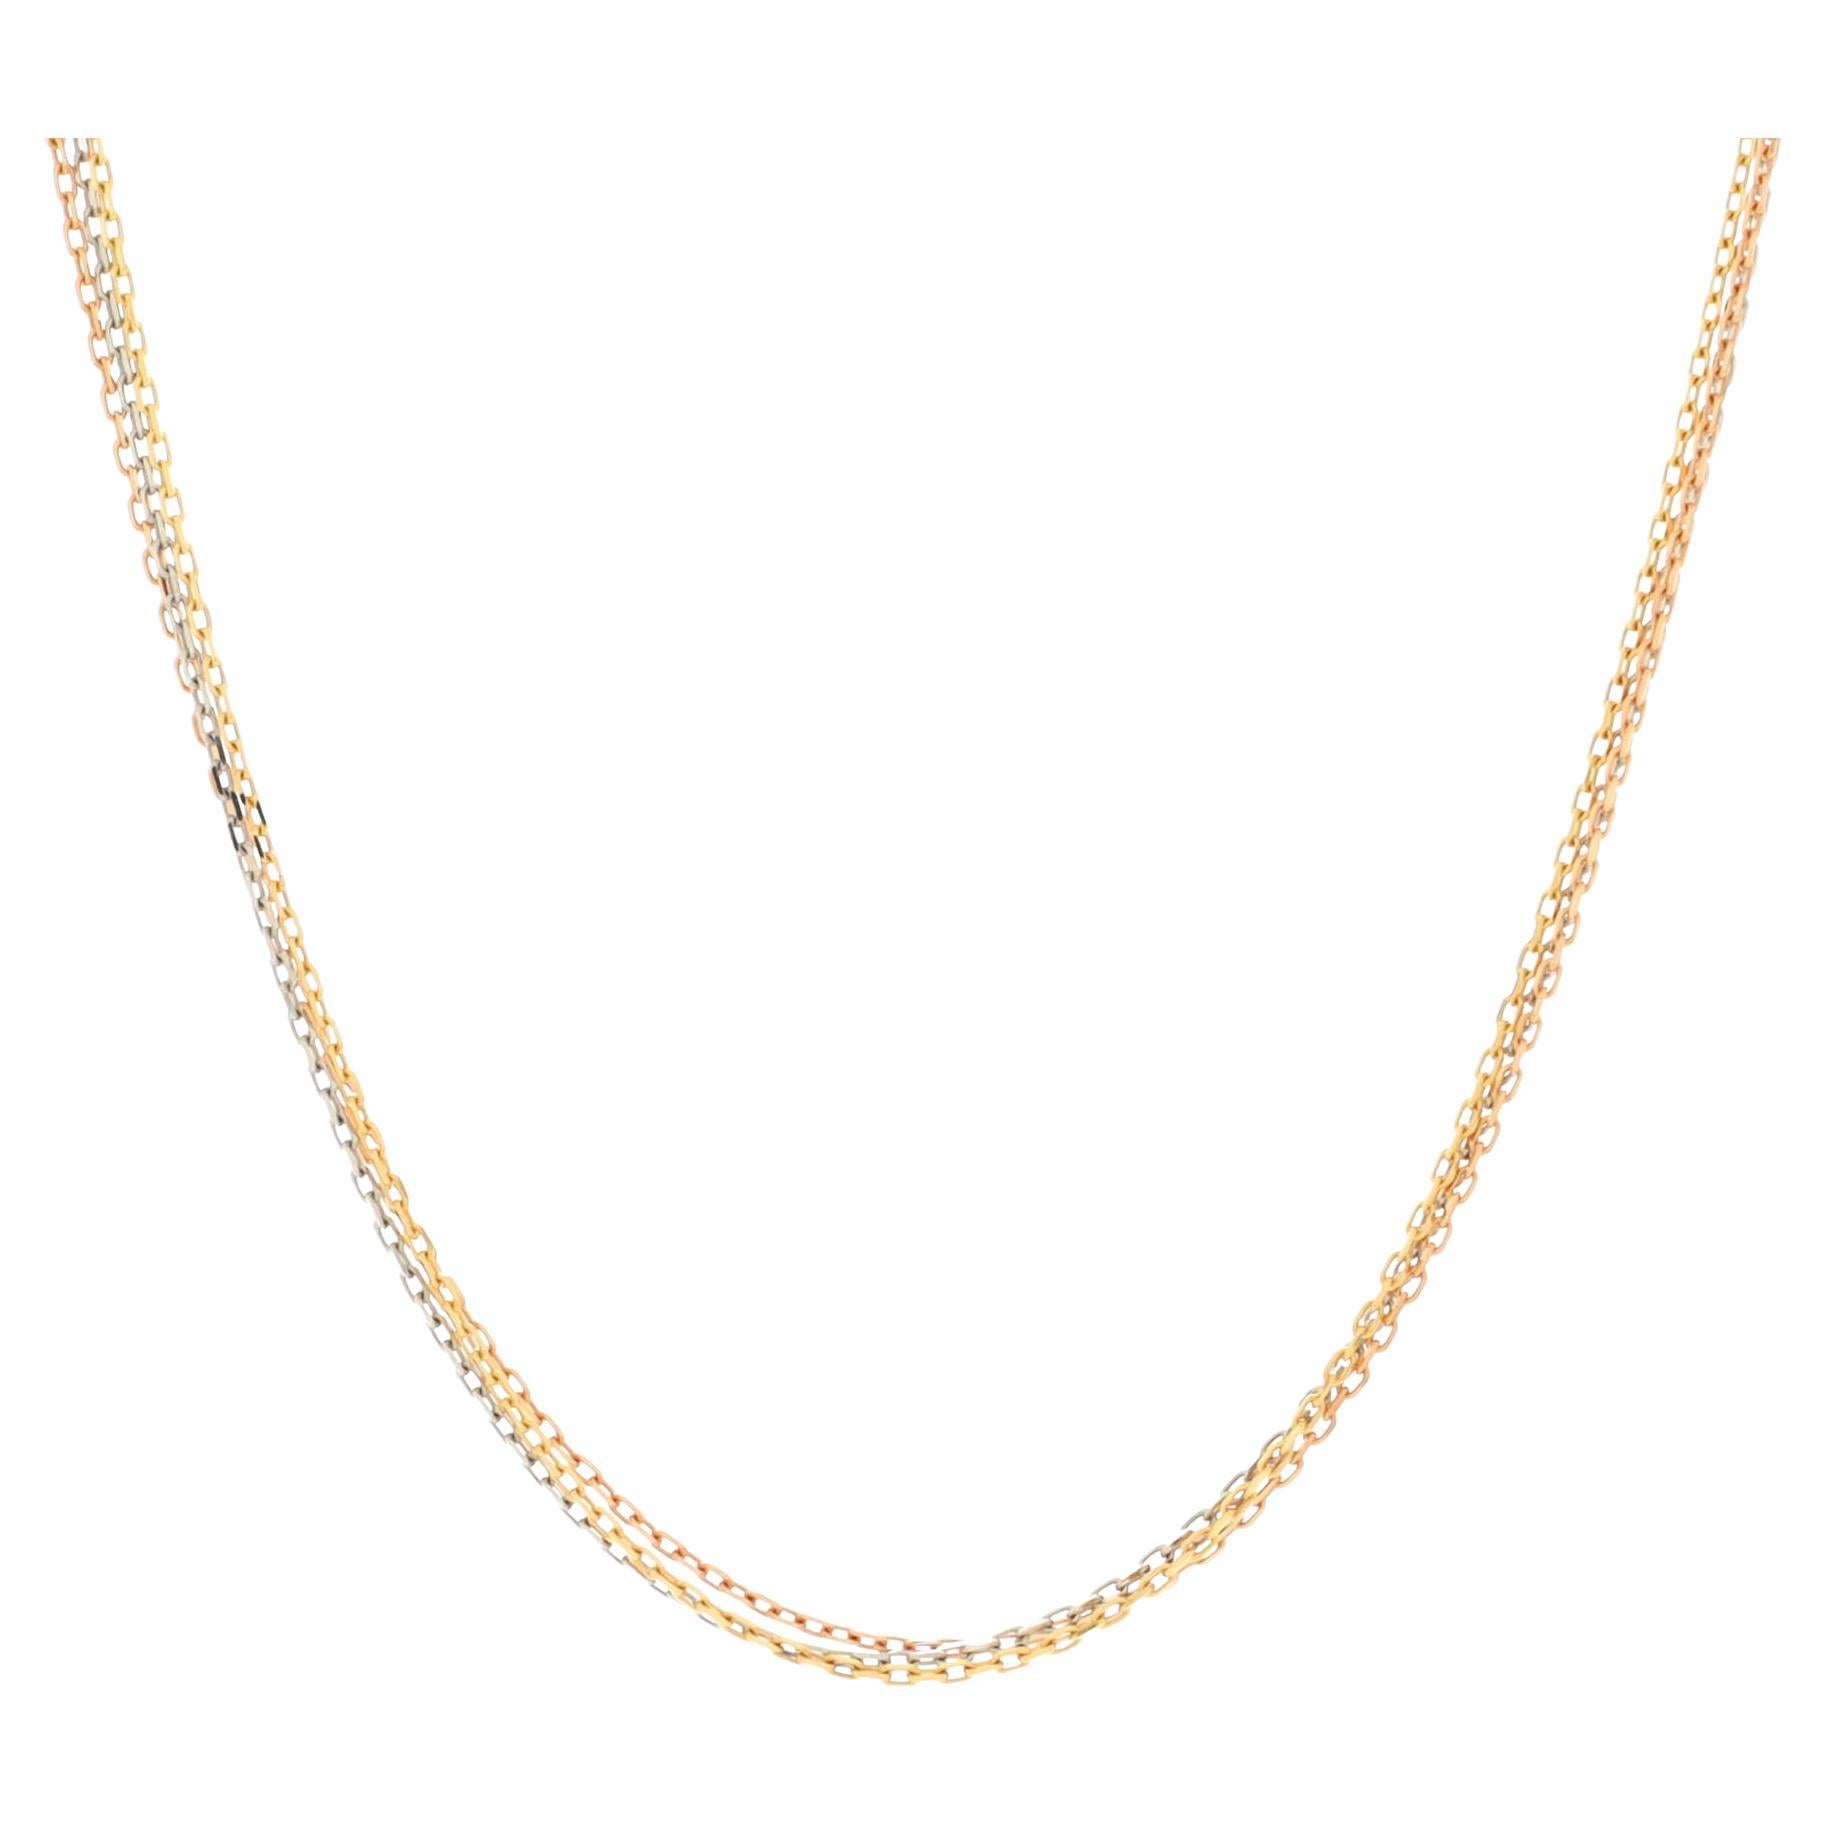 Cartier Trinity Chain Necklace 18K Tricolor Gold